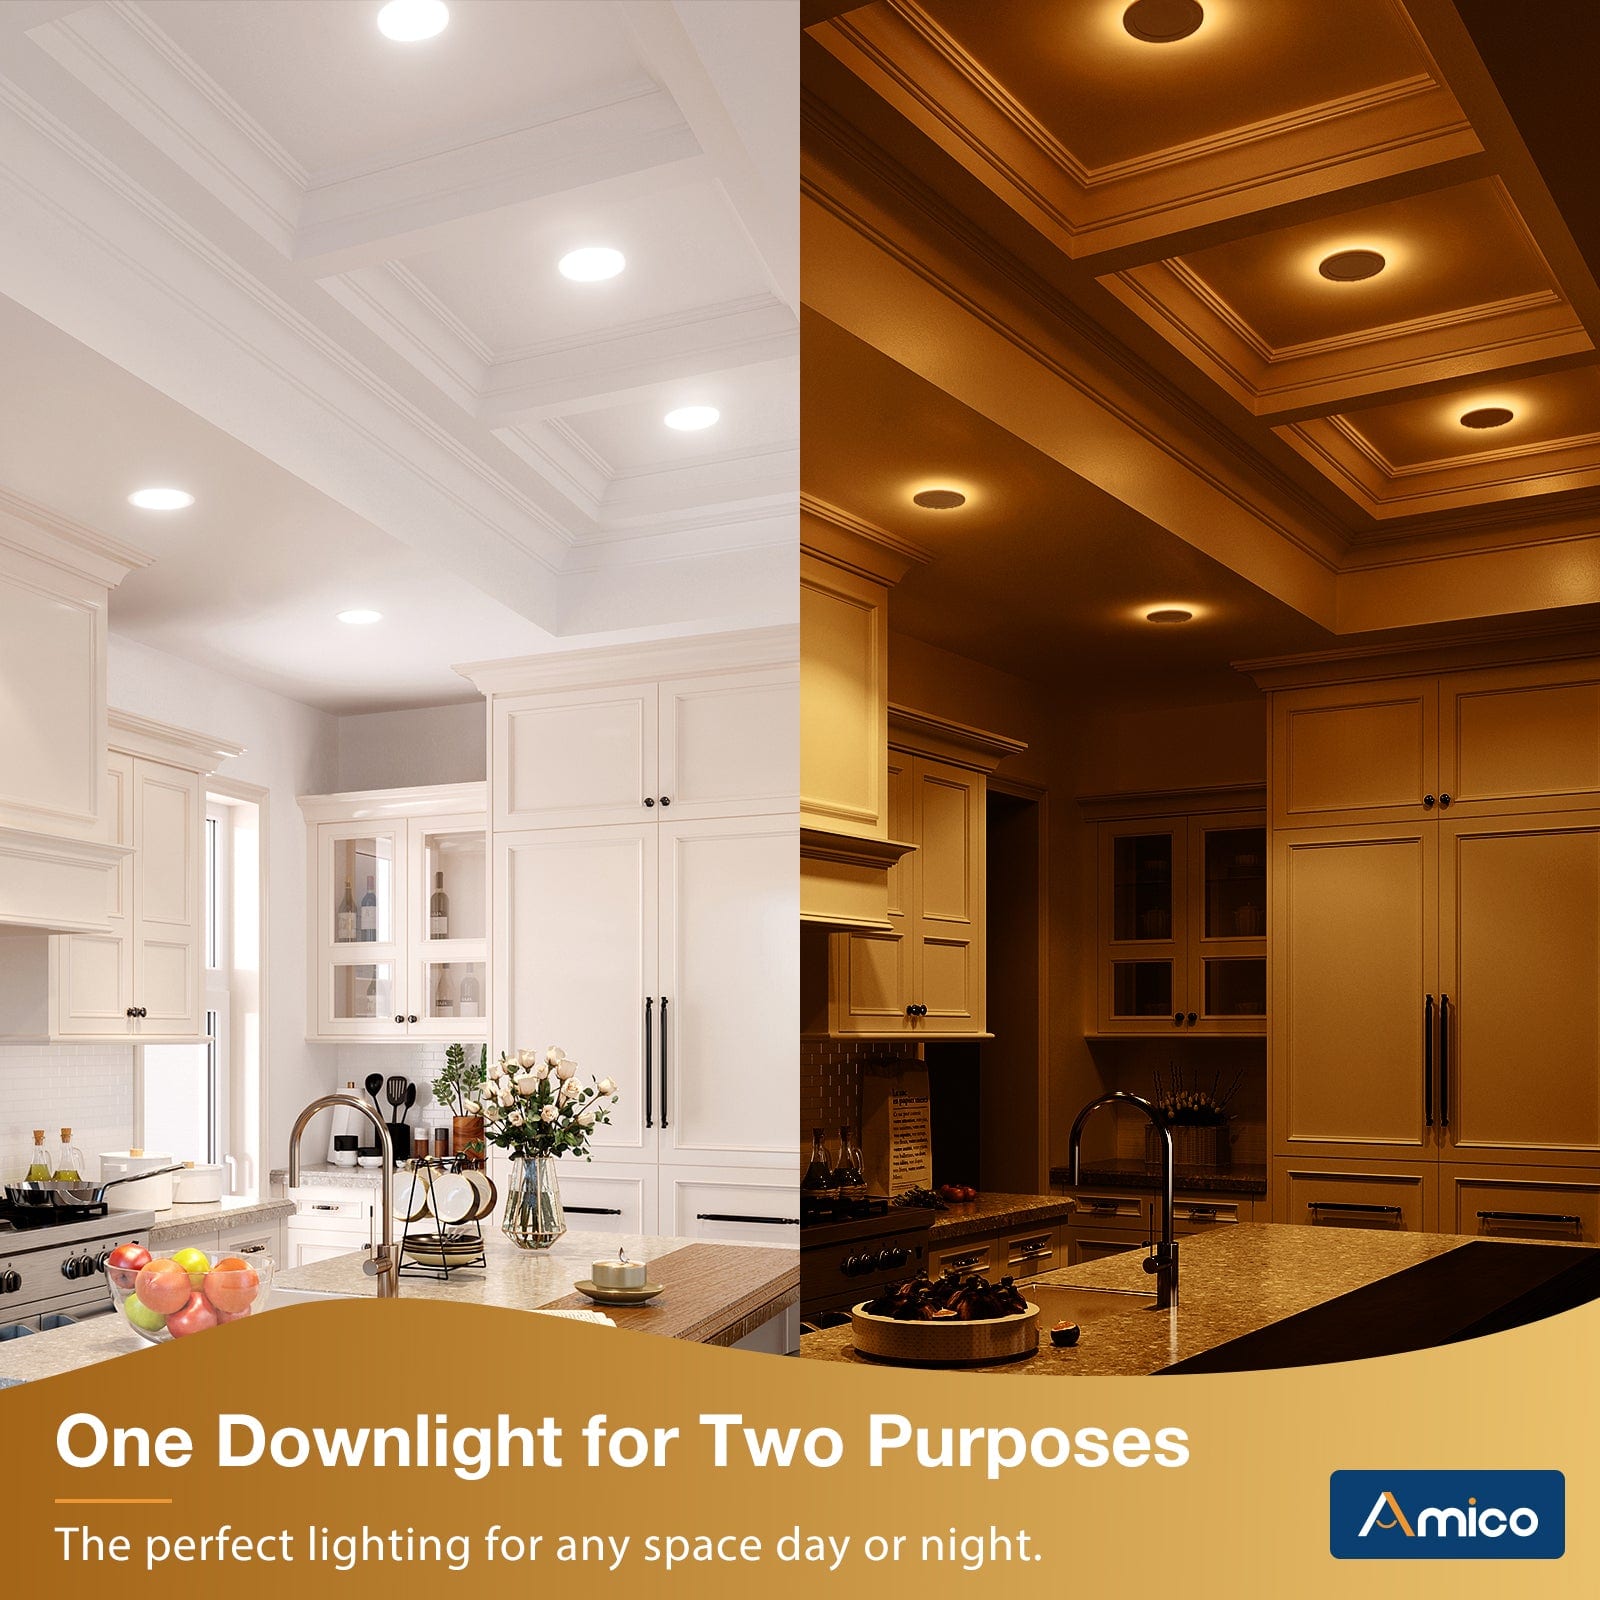 One Downlight for Two Purposes, the perfect lighting for any space day or night.